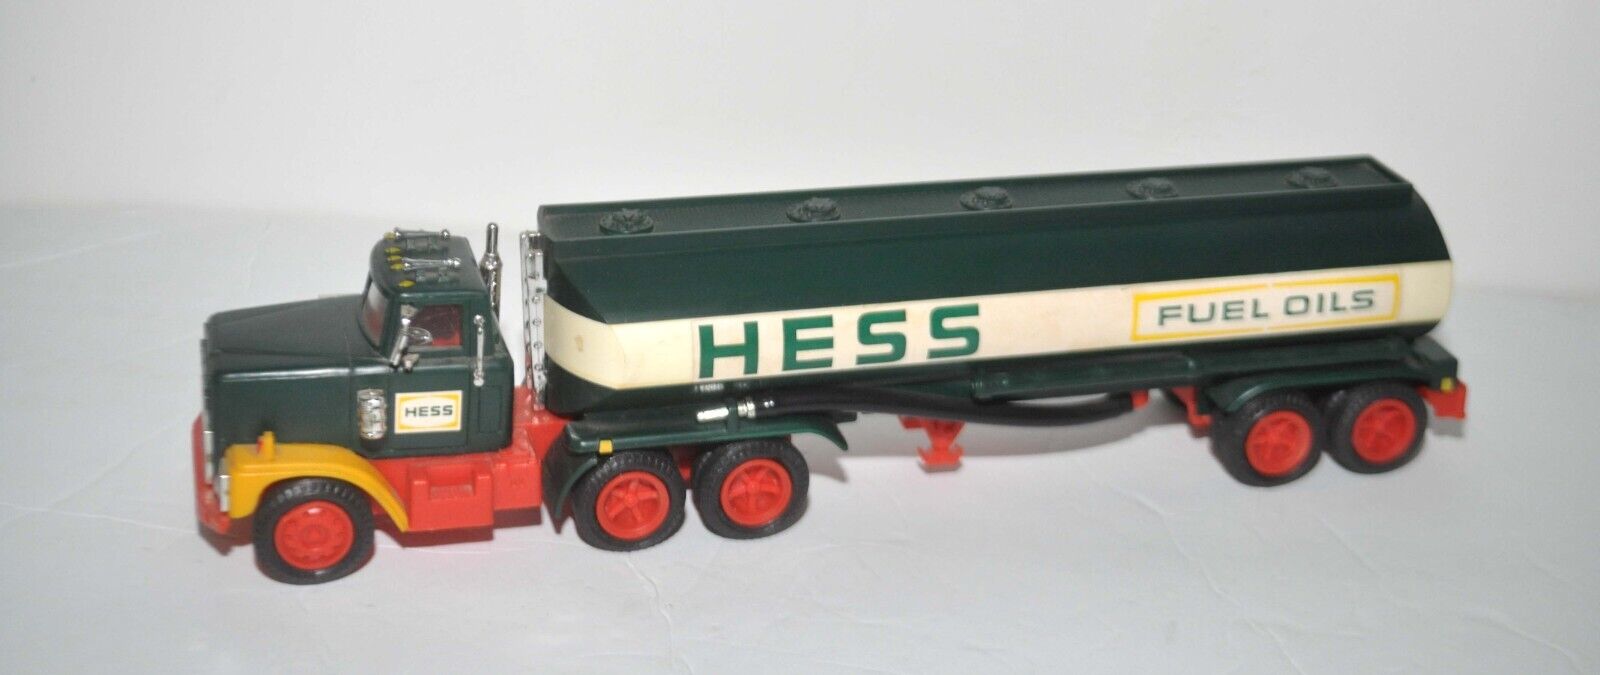 Vintage 1977 Hess Tanker toy truck no Box Working Lights